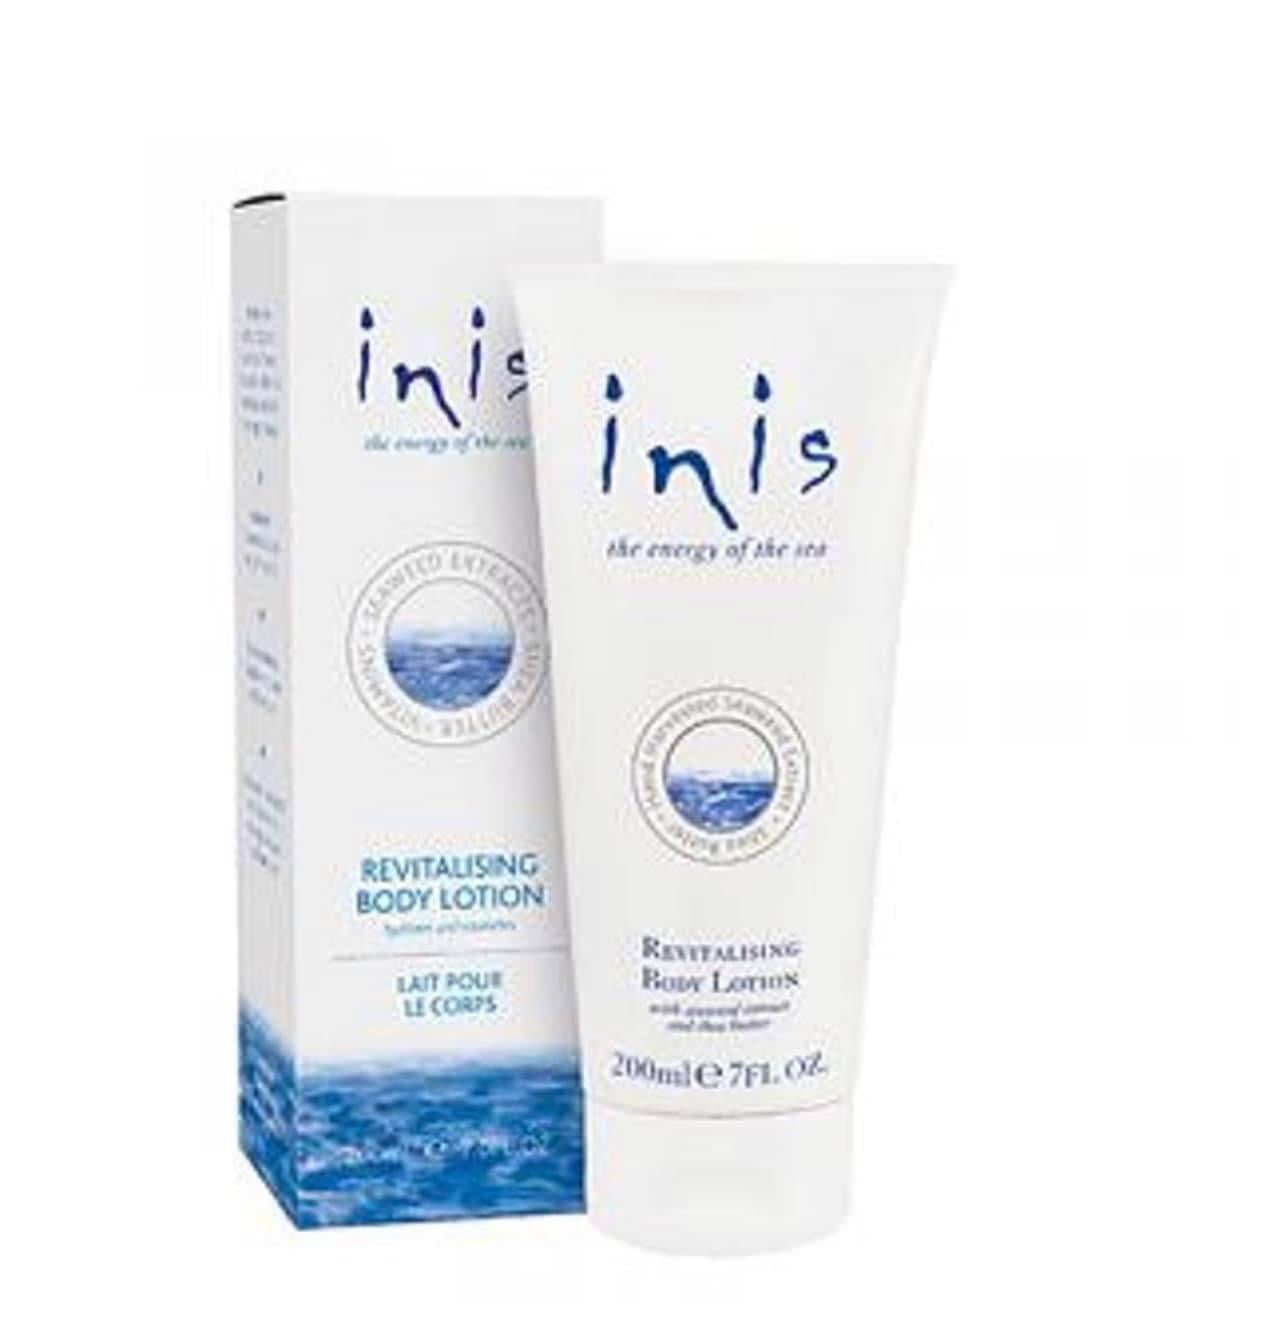 Inis Body Lotion